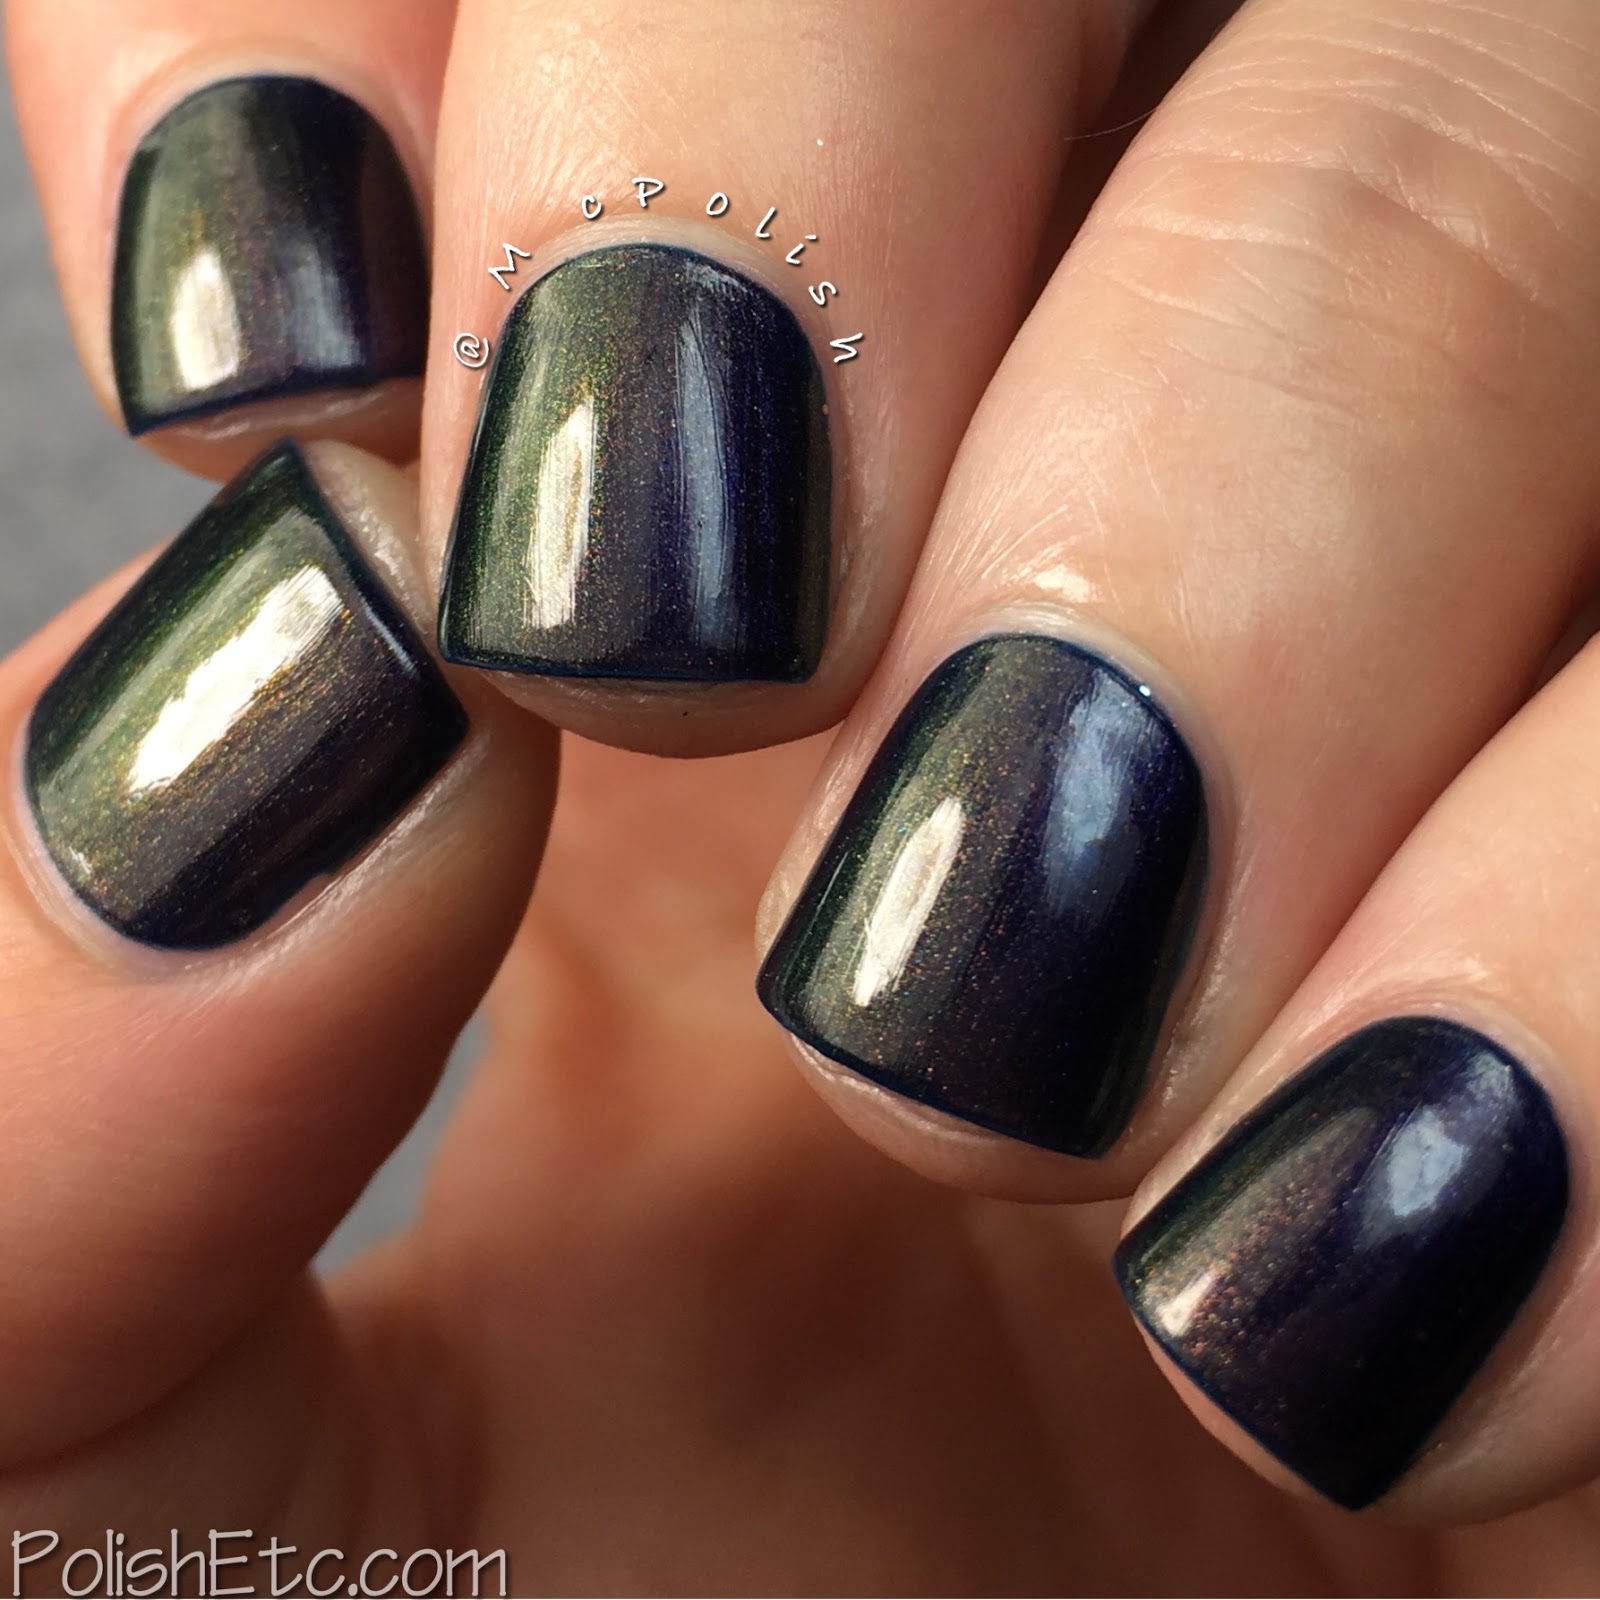 Great Lakes Lacquer - Polishing Poetic Collection - McPolish - The Dying of the Light